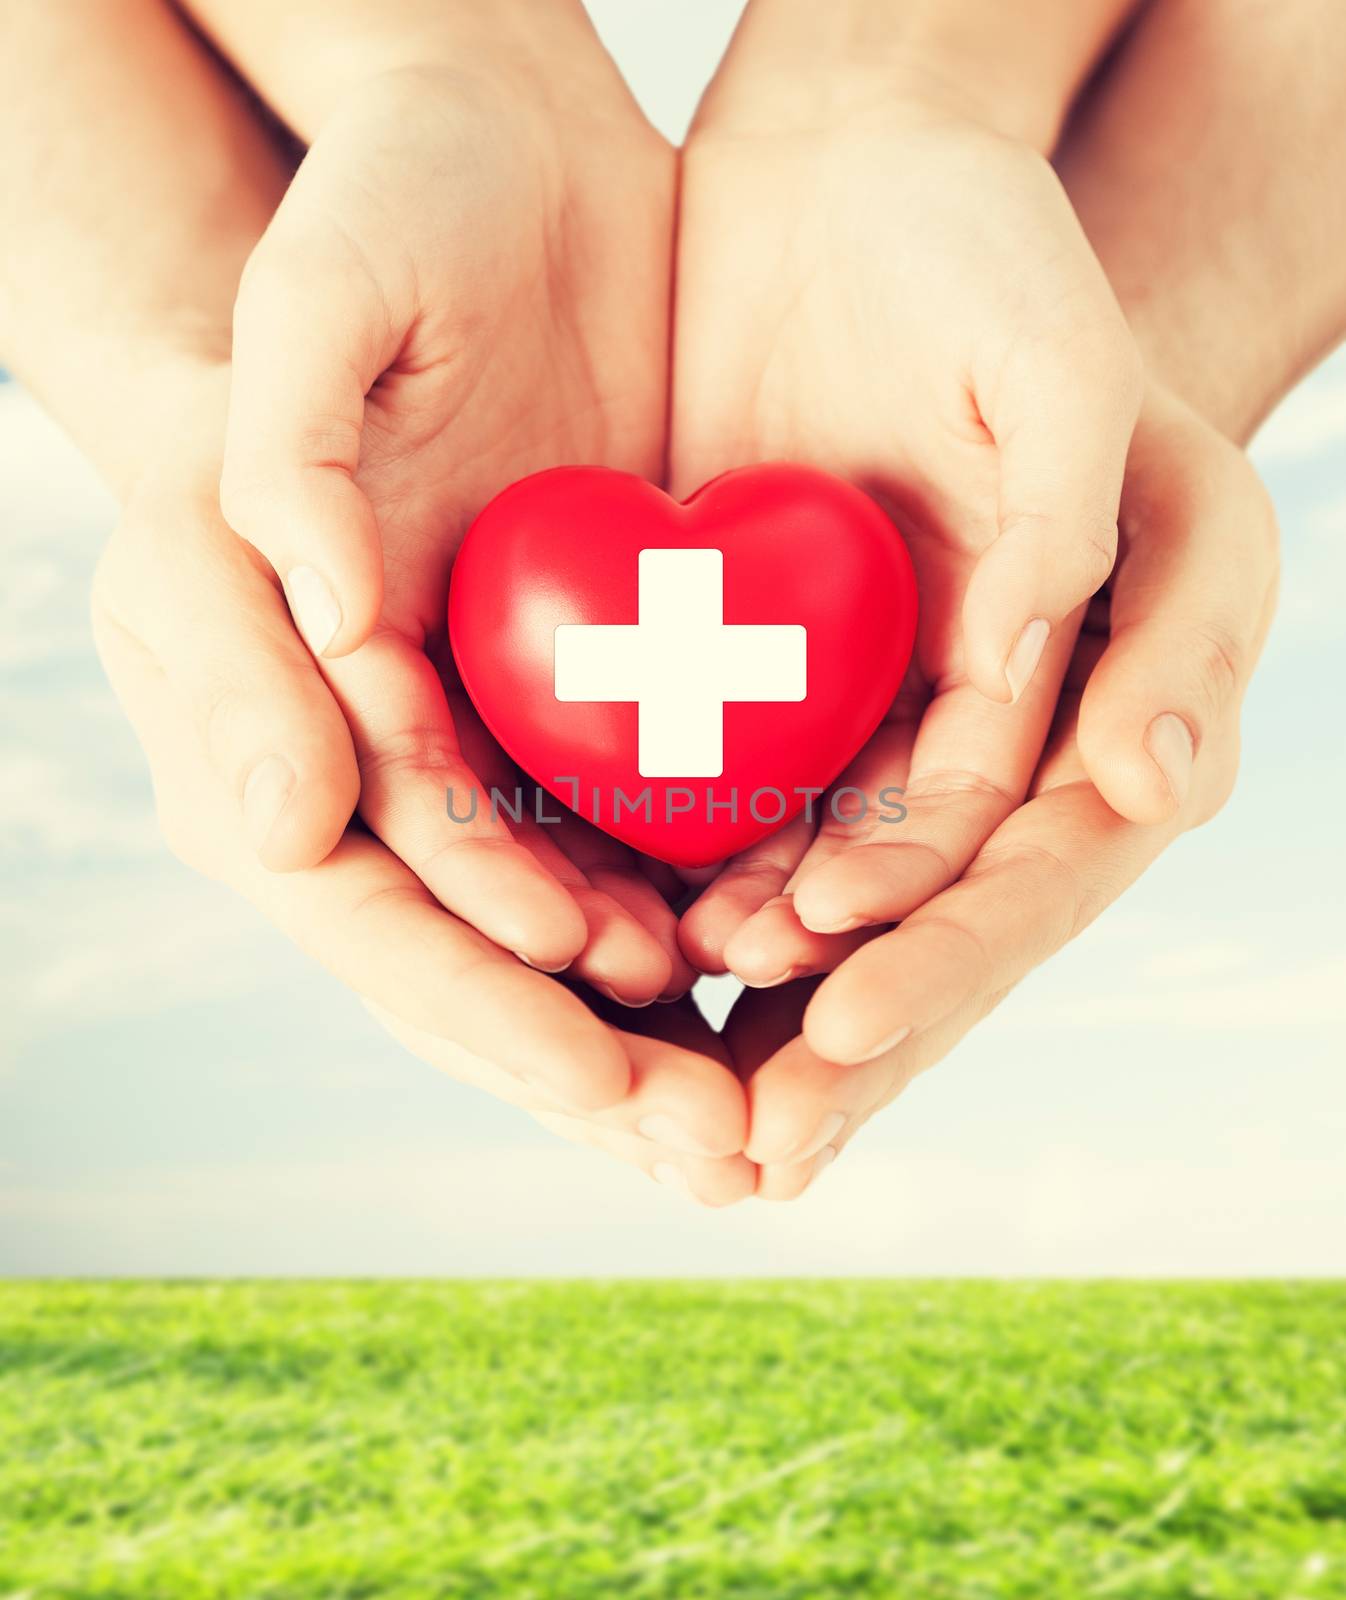 family health, charity and medicine concept - male and female hands holding red heart with cross sign